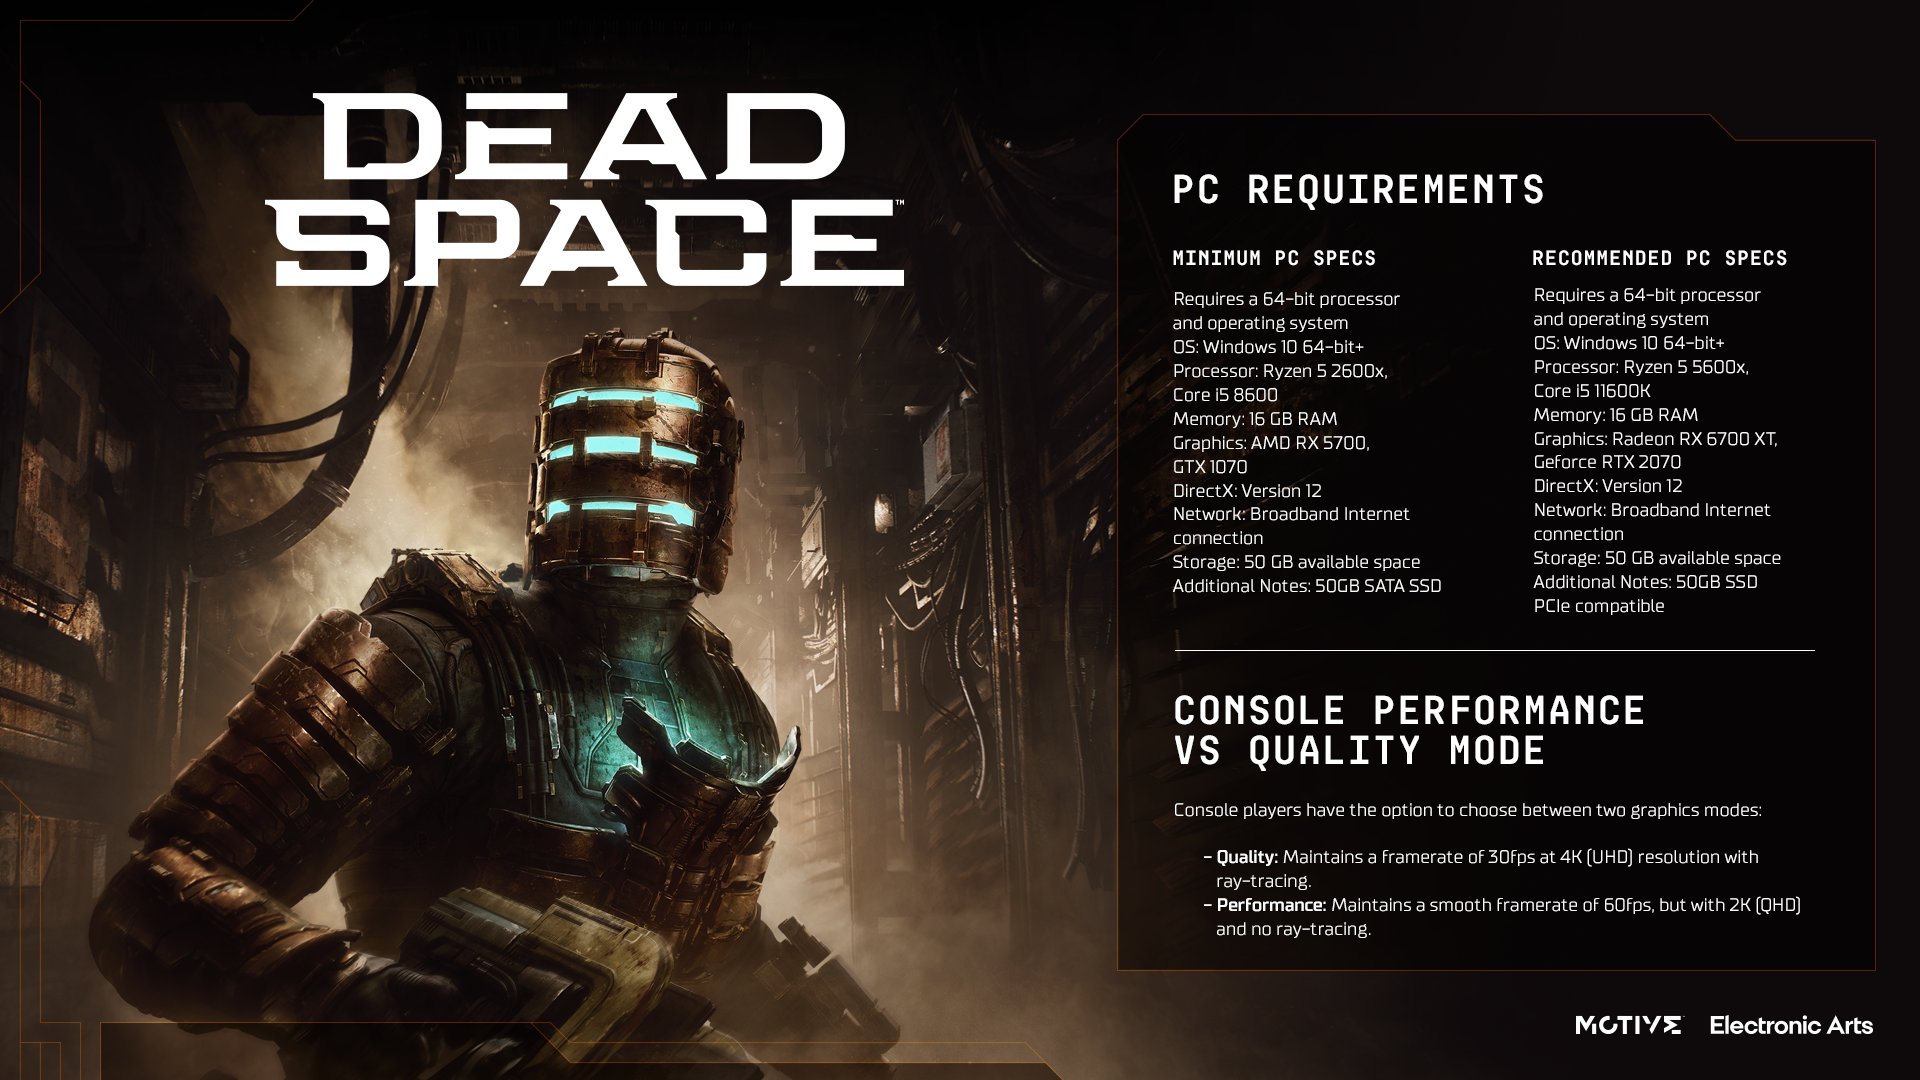 Dead Space on X: It's #DeadSpace launch week 🔥 Here's everything